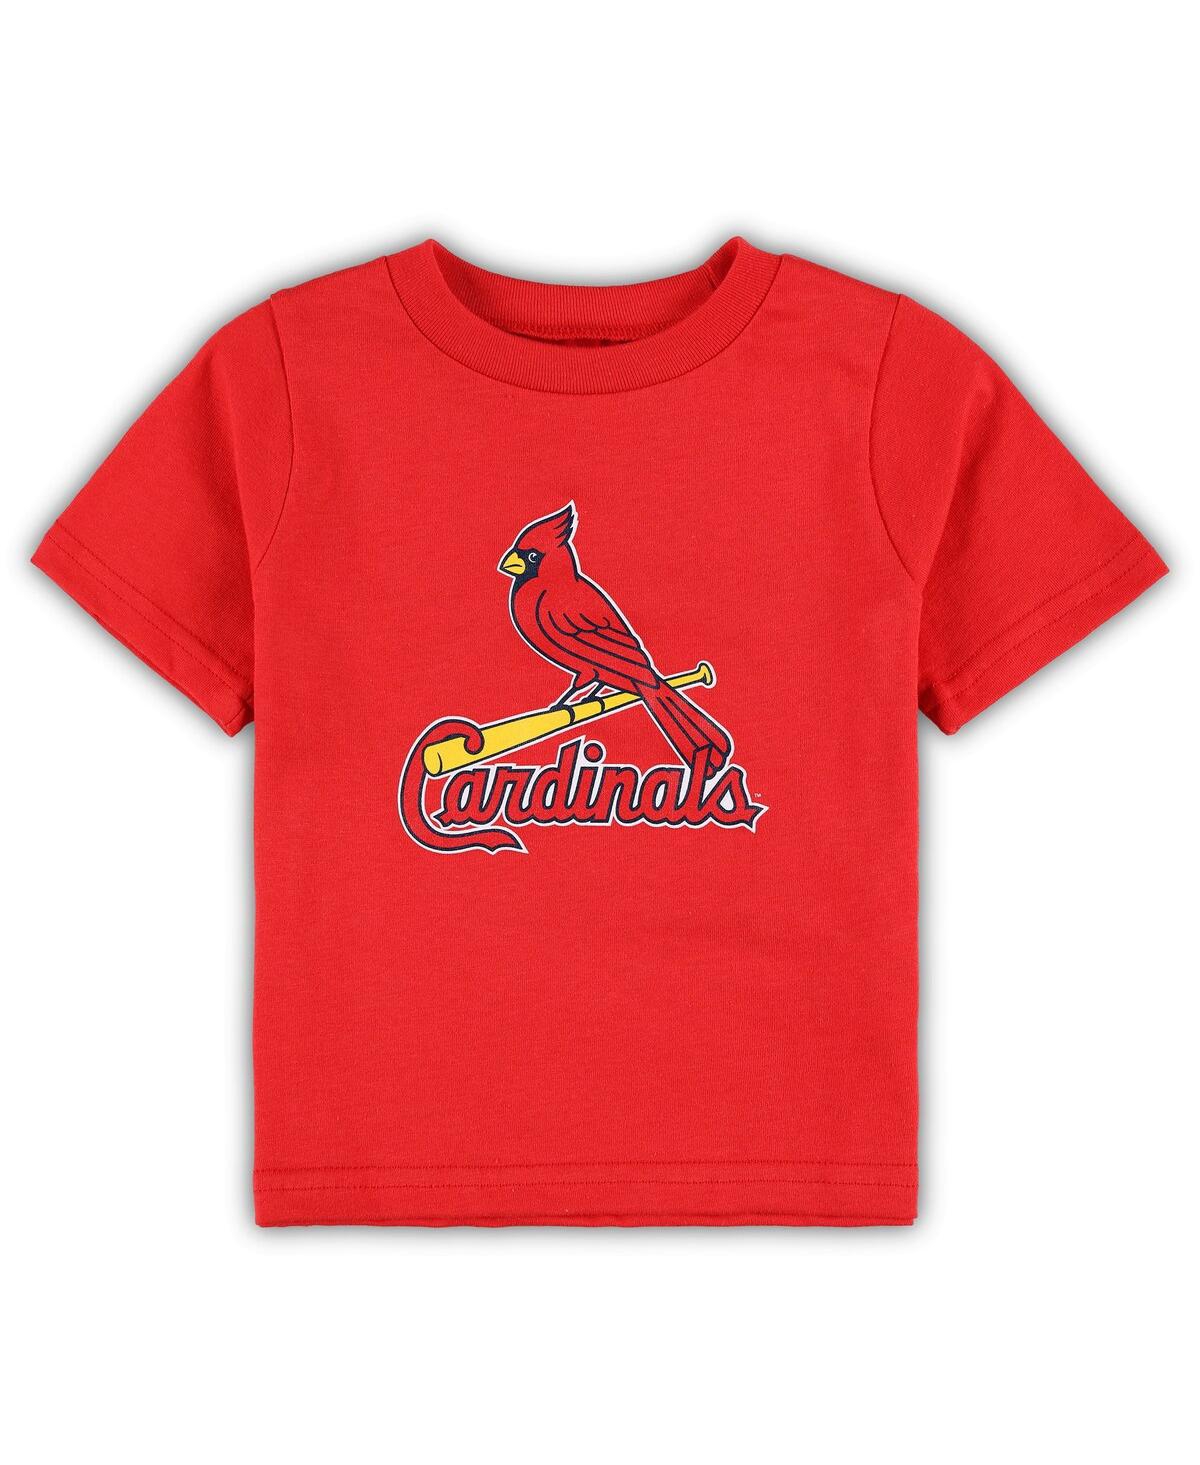 Outerstuff Babies' Infant Boys And Girls Red St. Louis Cardinals Team Crew Primary Logo T-shirt